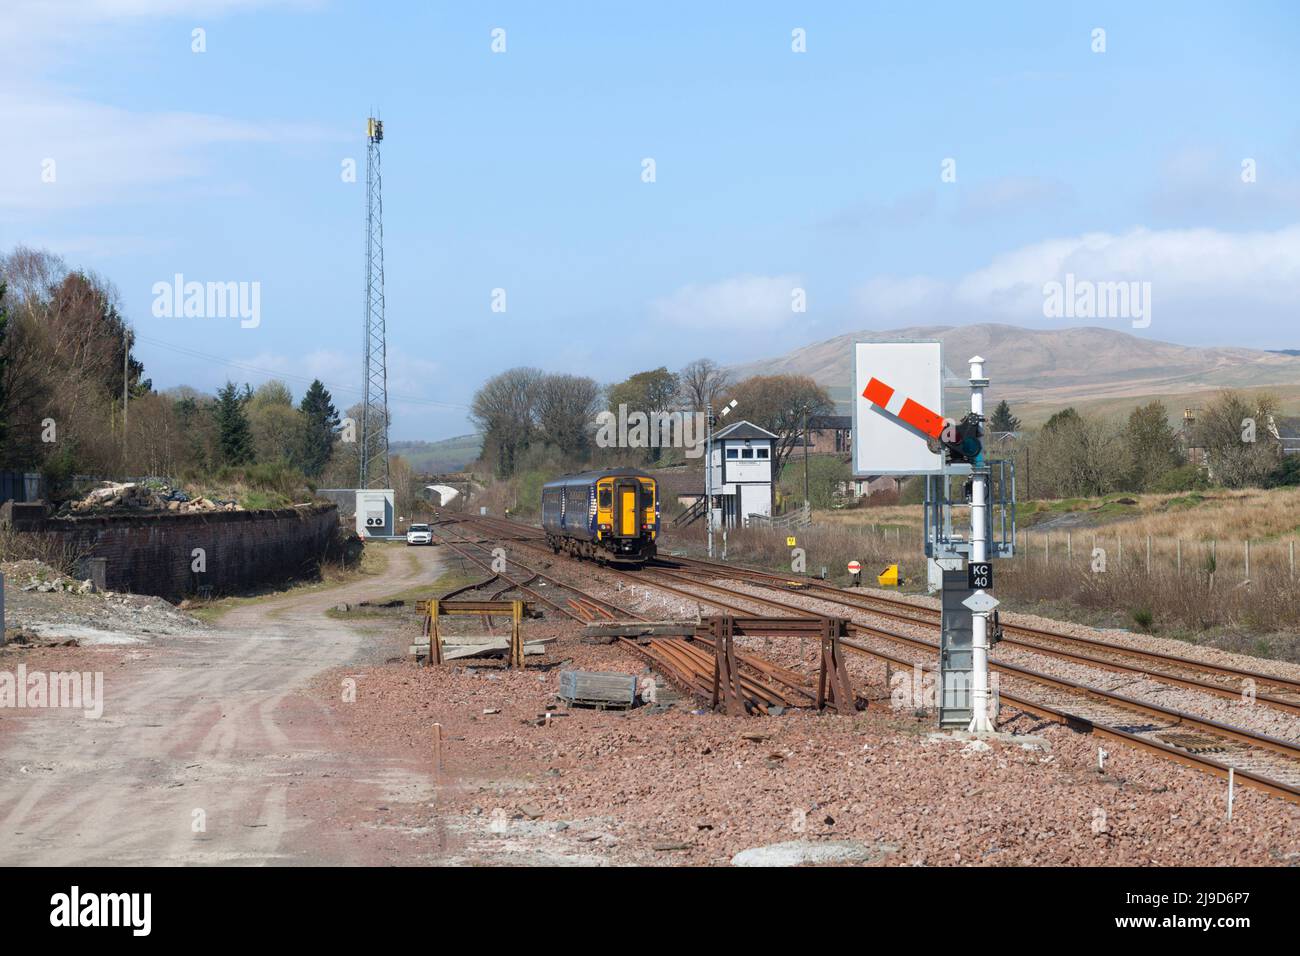 Scotrail class 156 sprinter train 156492 departing from  Kirkconnel with a mechanical signal box and semaphore railway signals Stock Photo